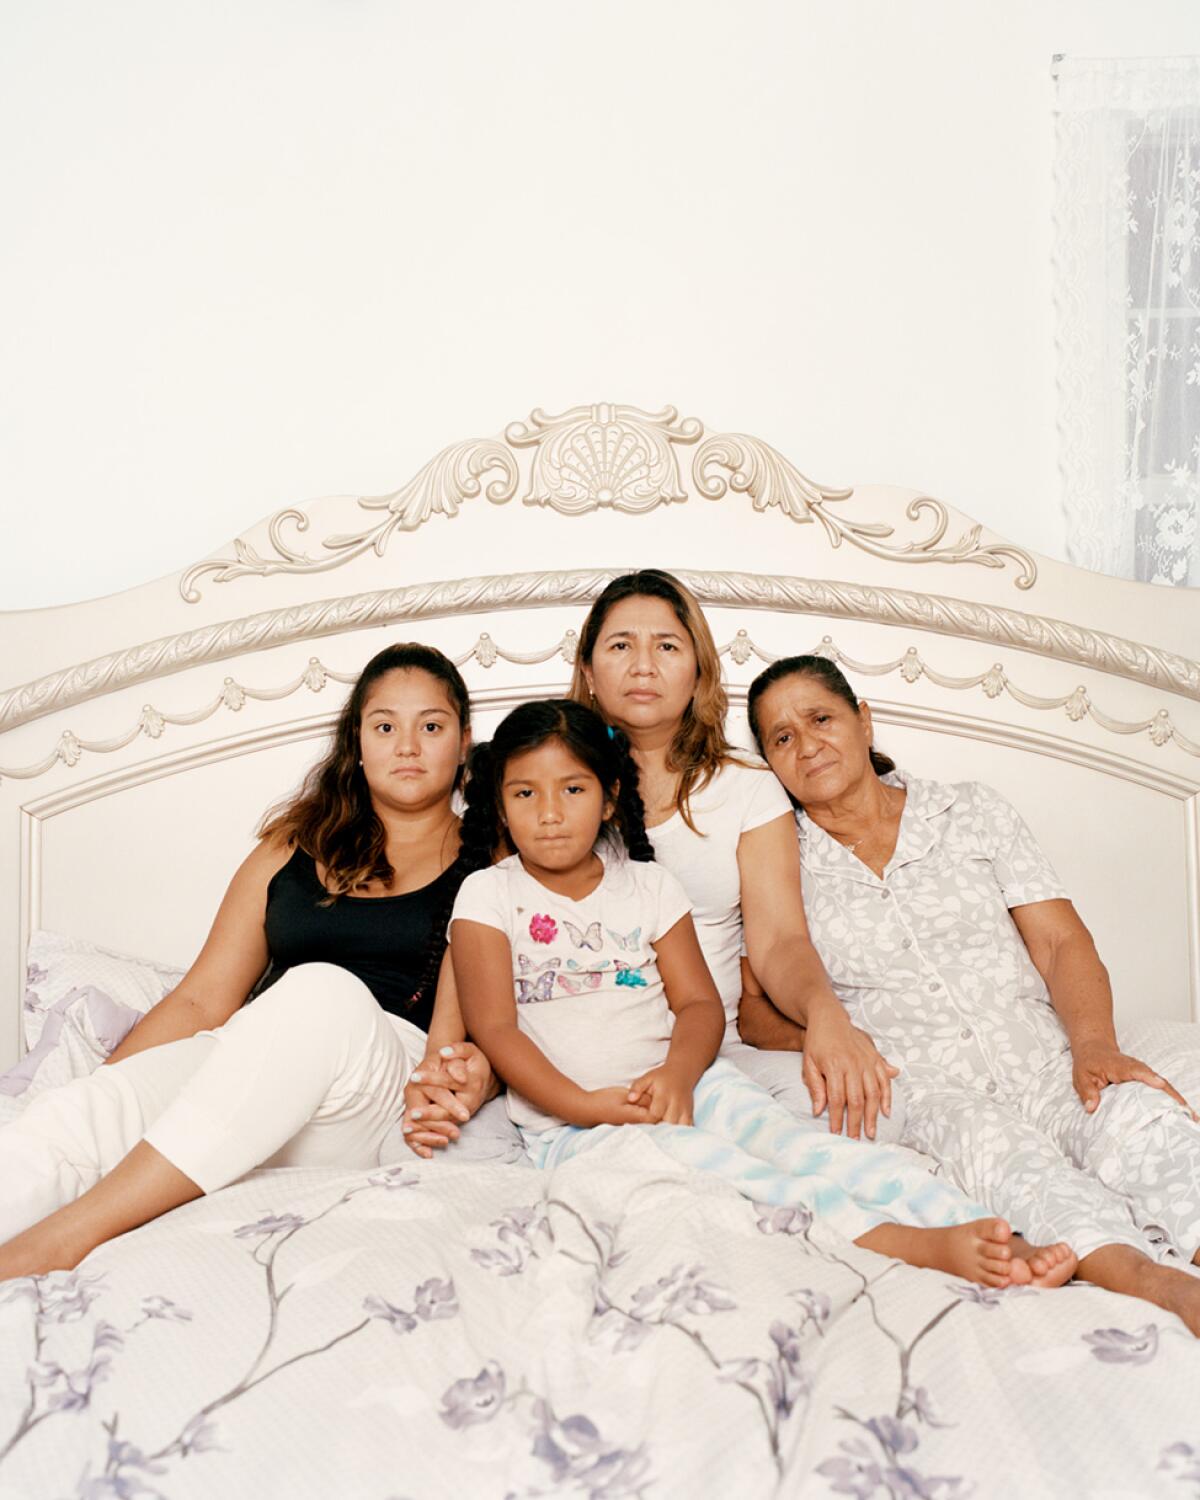 A family of four Latina women is seen sitting on an ornate white bed.